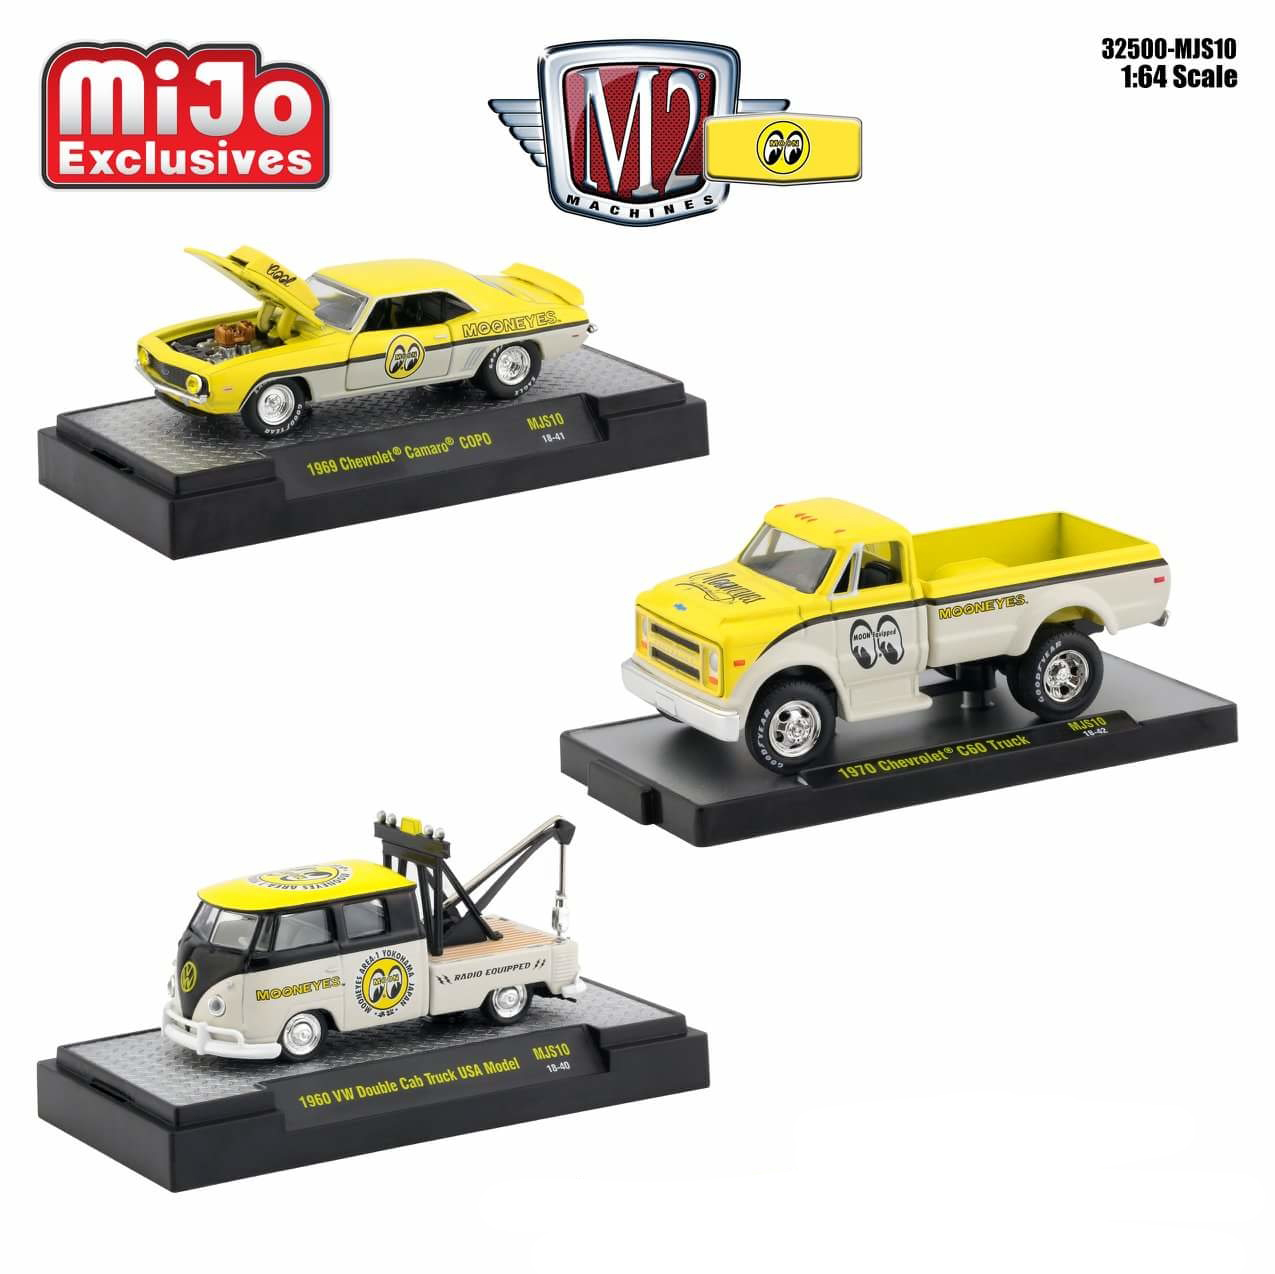 Mooneyes Assortment Set Of 3 Cars Limited Edition To 3200 Pieces Worldwide 1/64 Diecast Models By M2 Machines